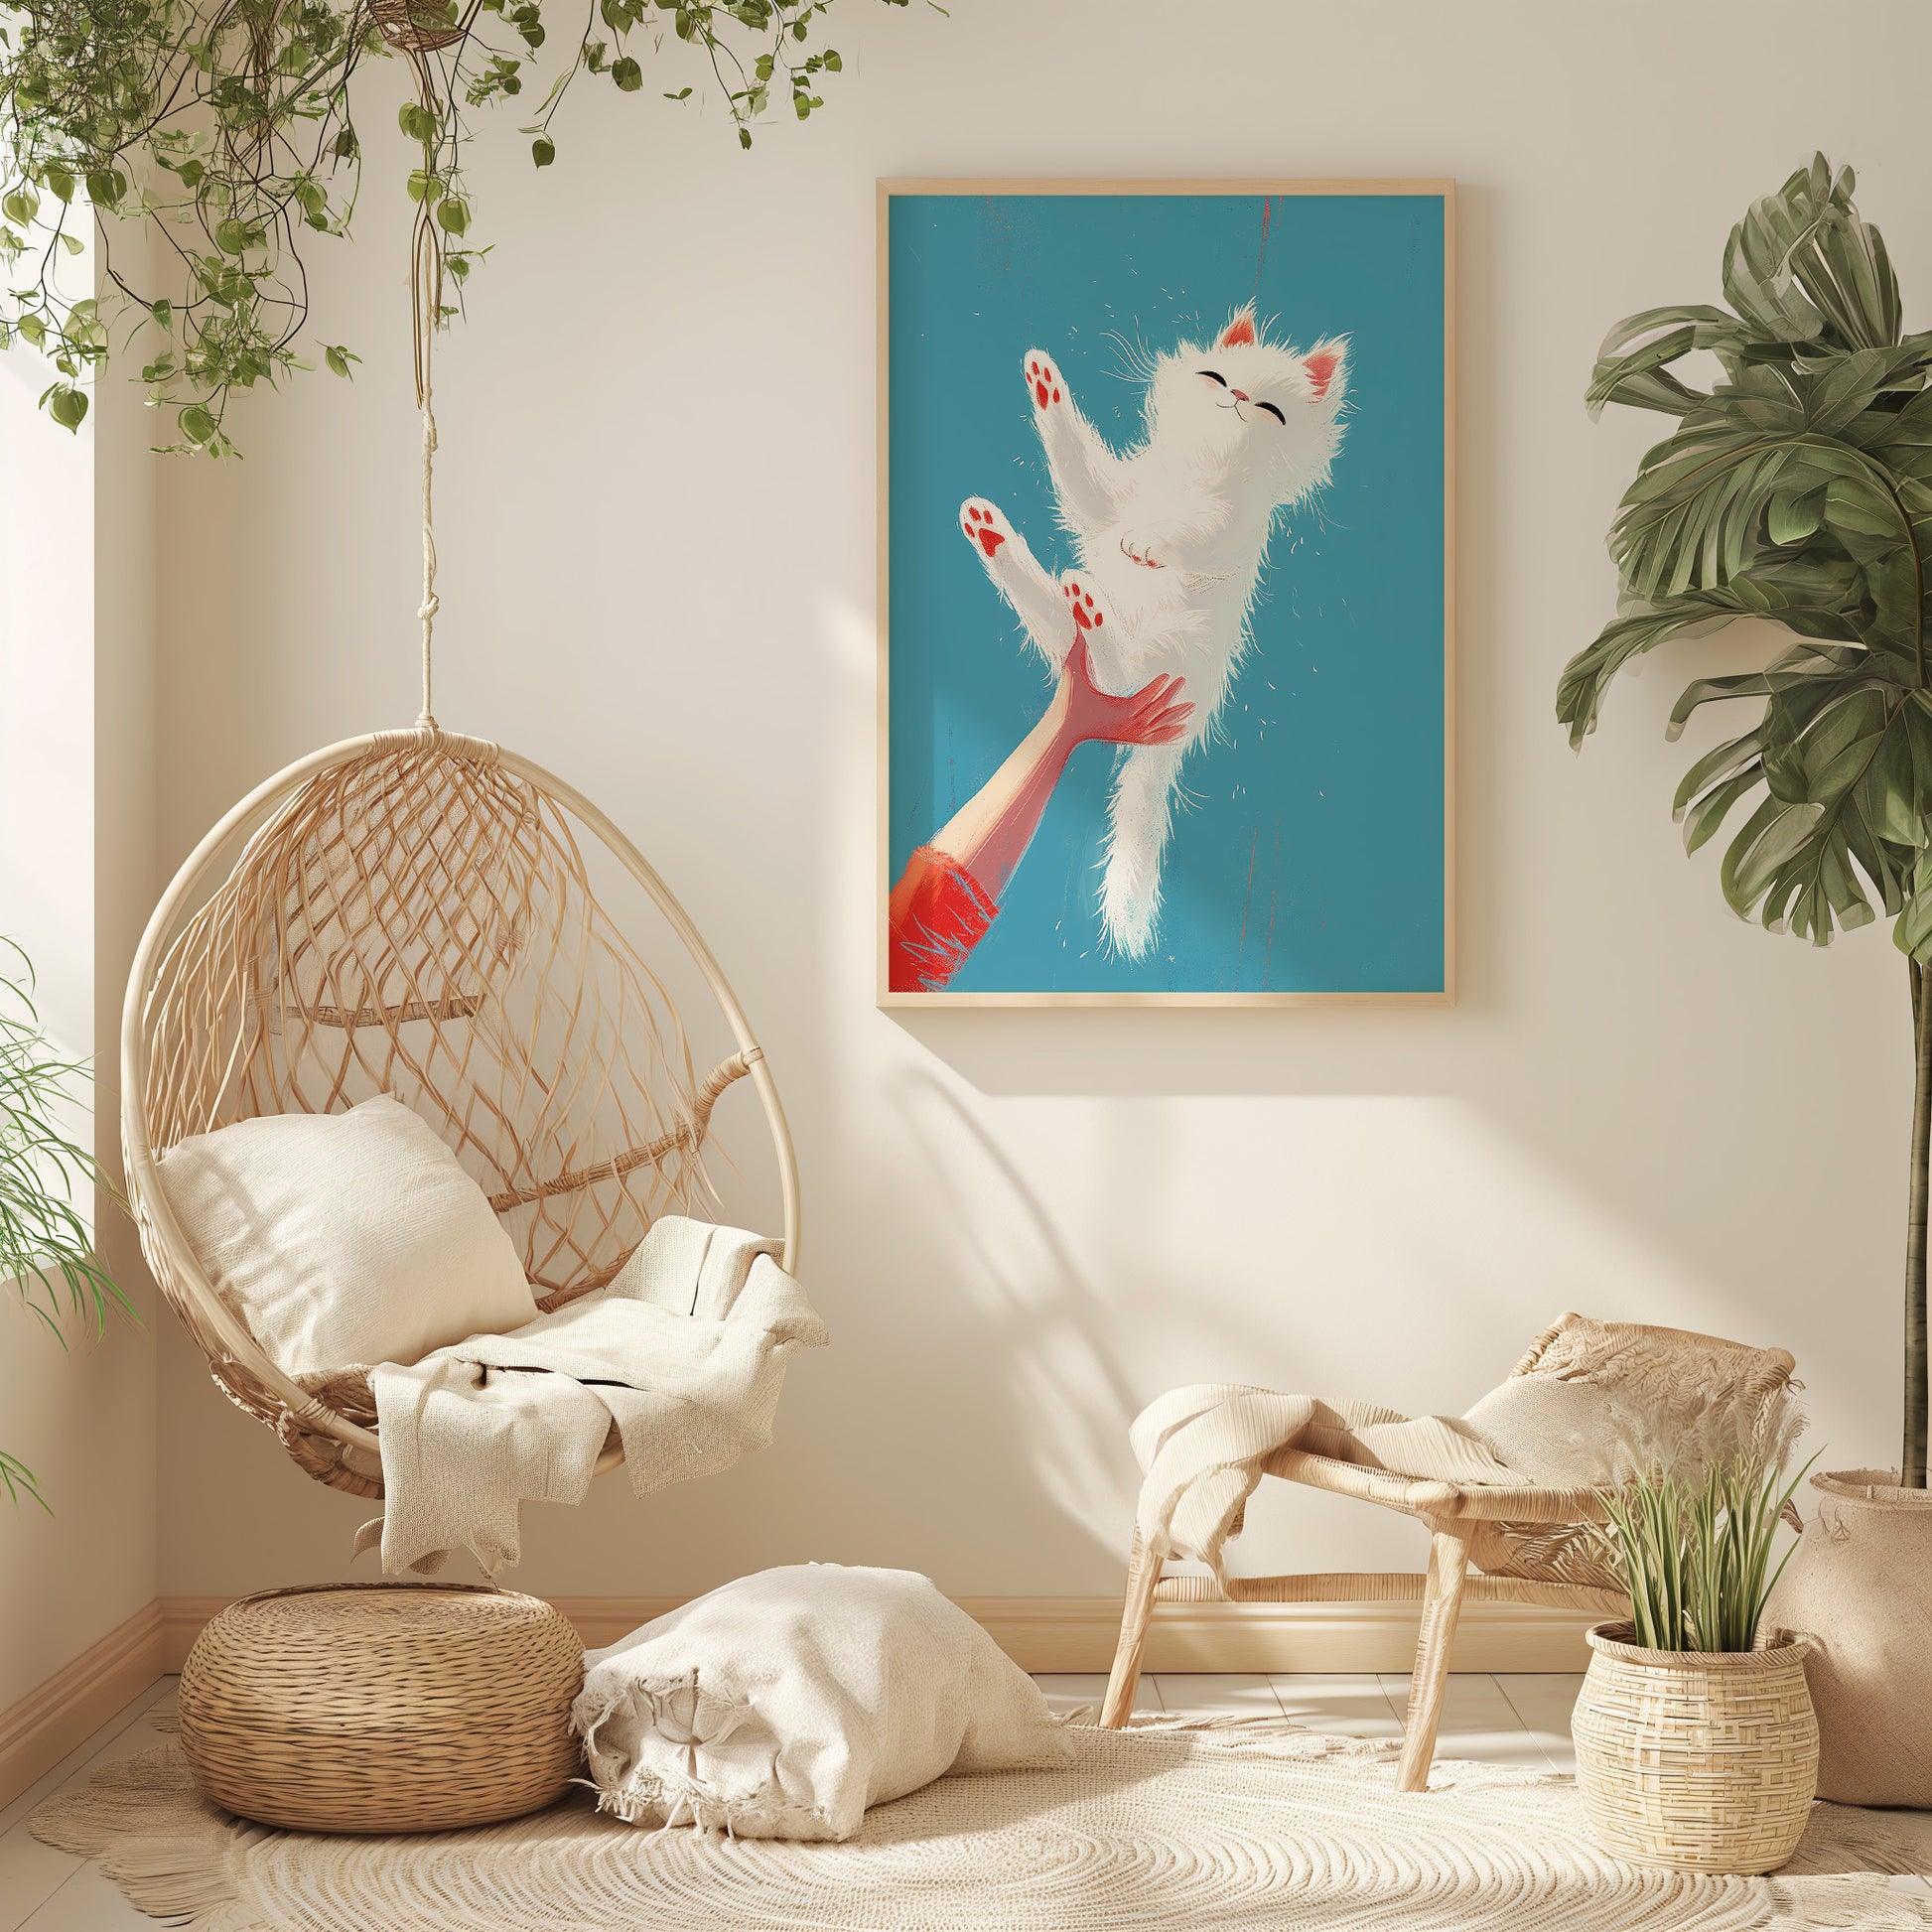 Modern room with a hanging chair, plants, and a playful cat art on the wall.